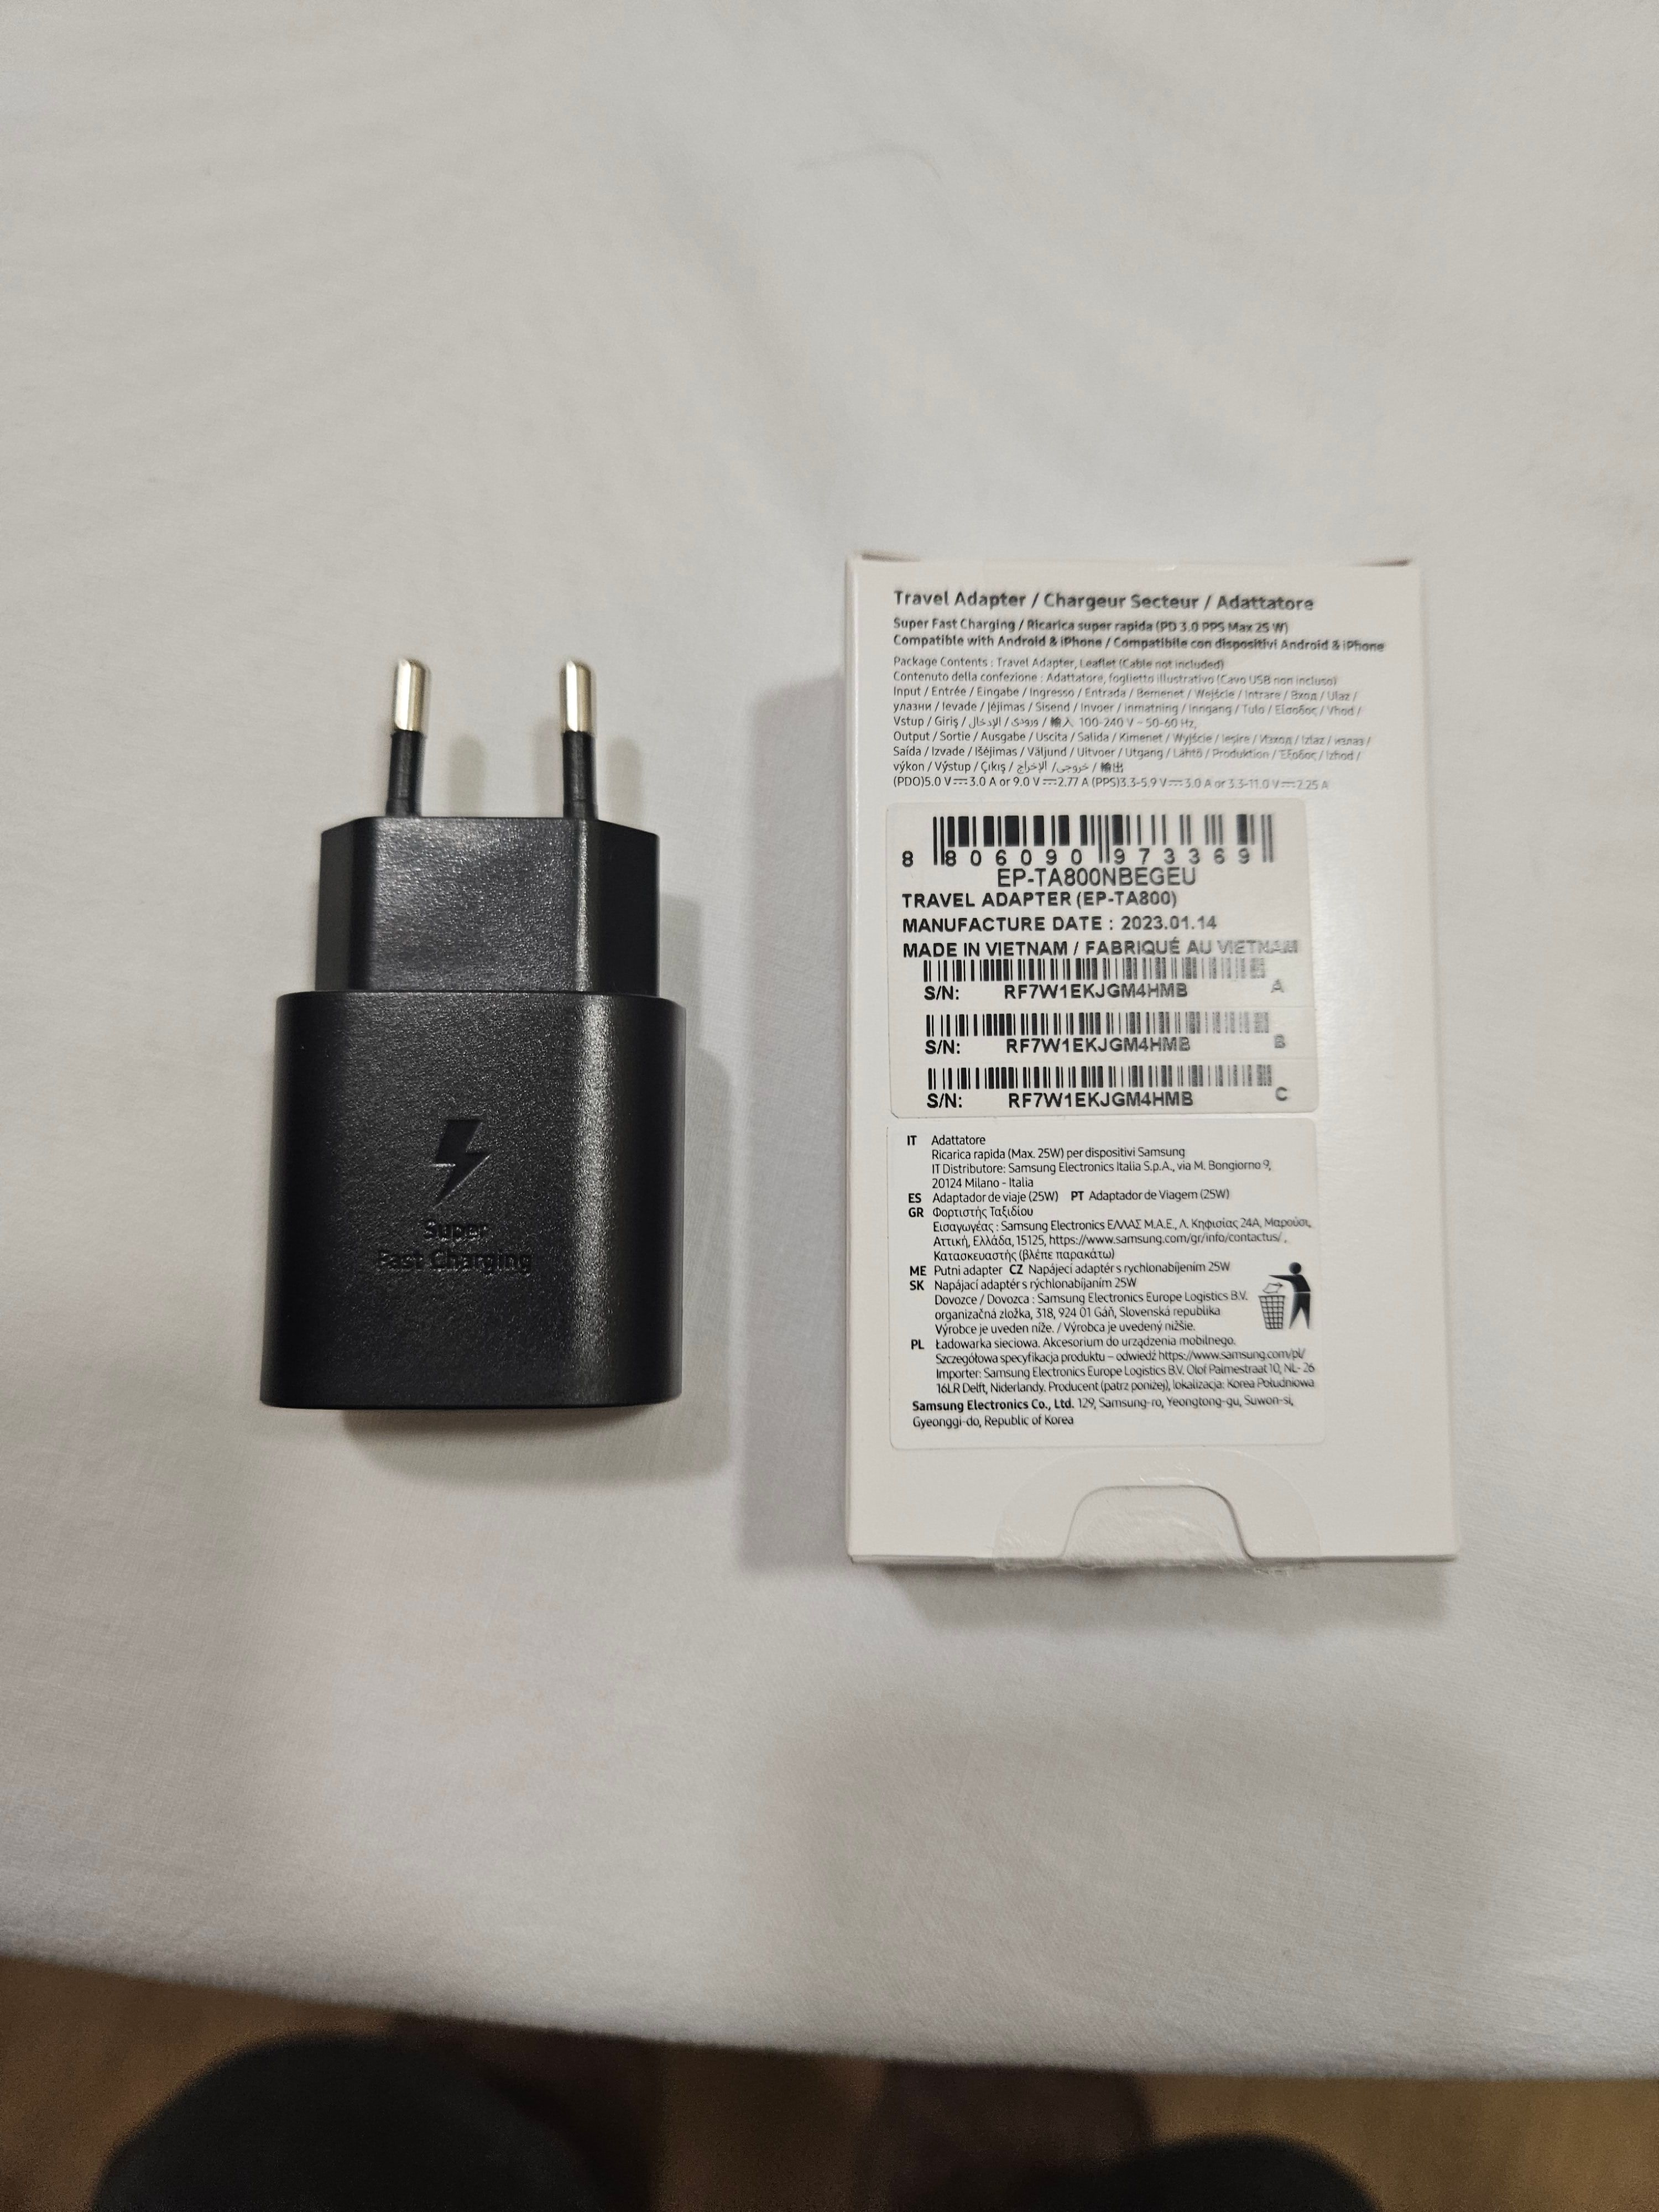 Is this charger fake or not - Samsung Community